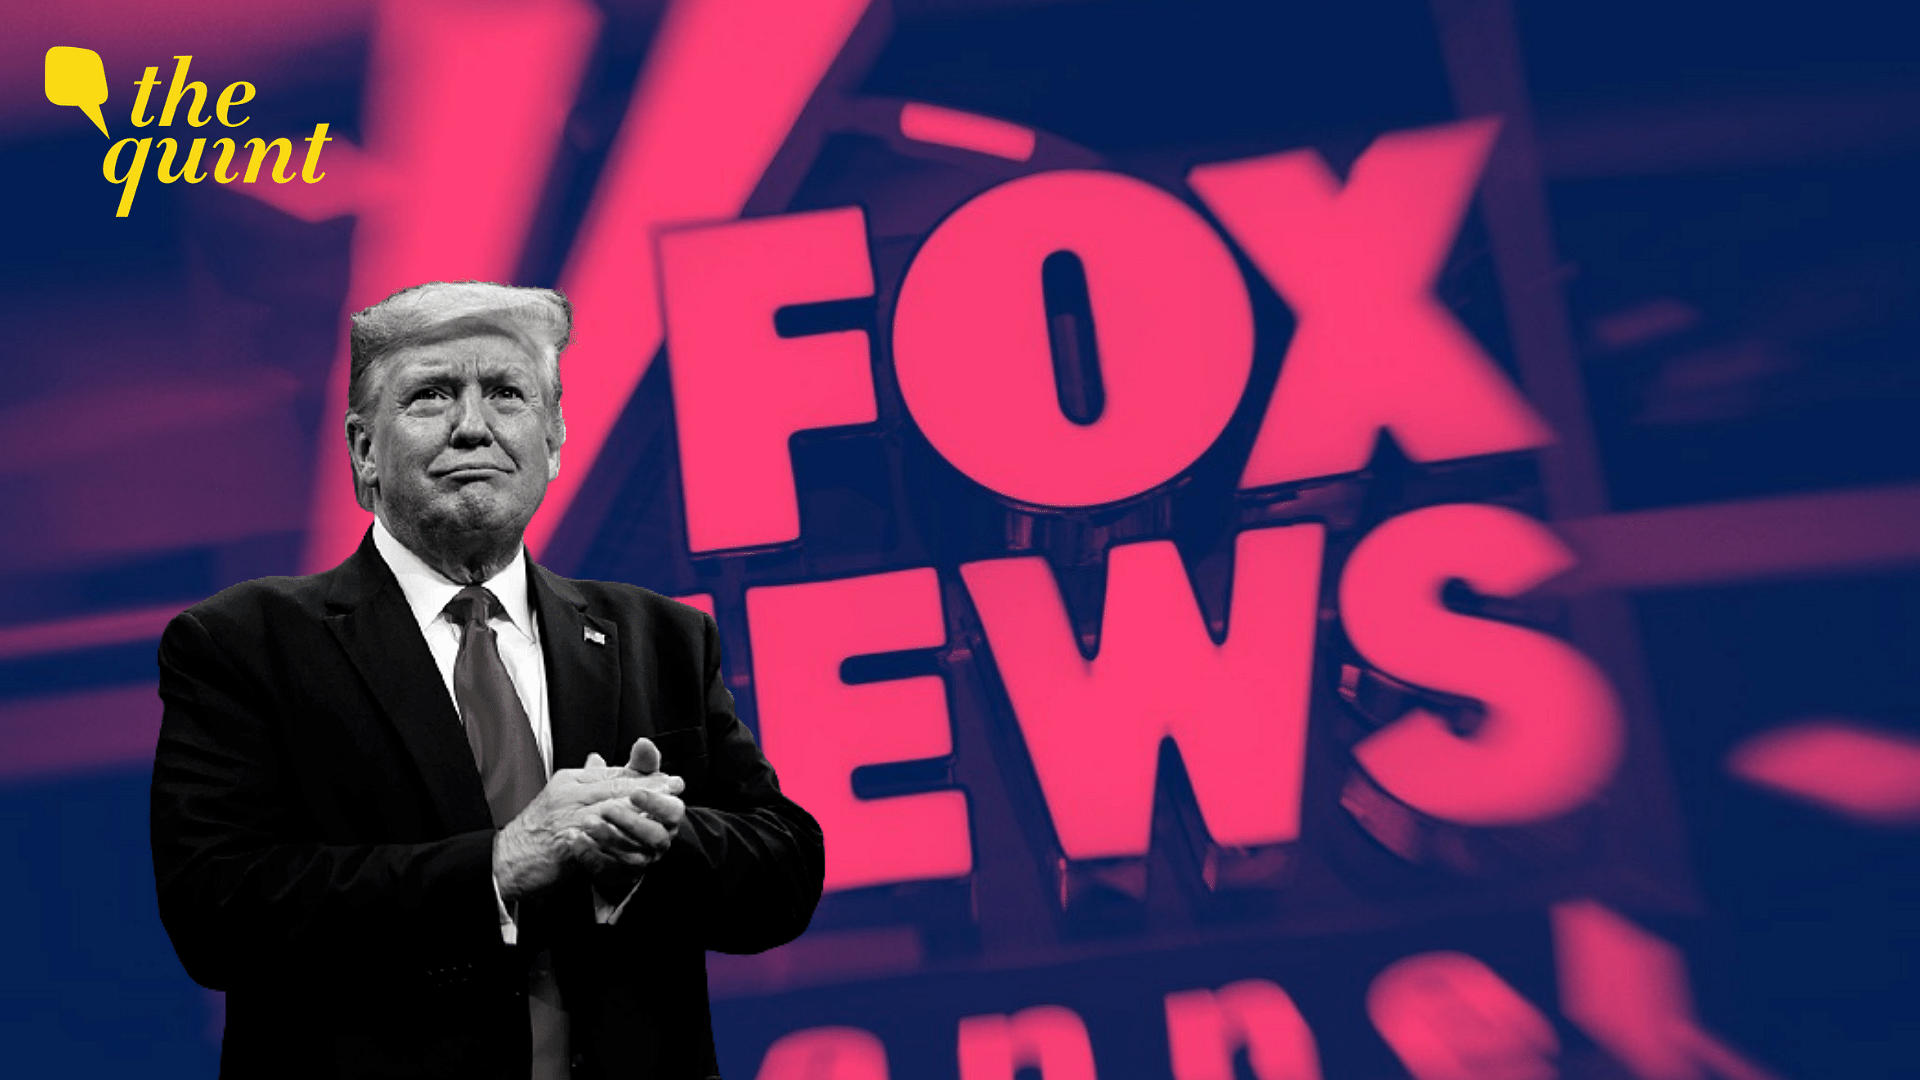 The defeat of Donald Trump is not quite the end of the world for Fox News, but it is the passing of a golden age.